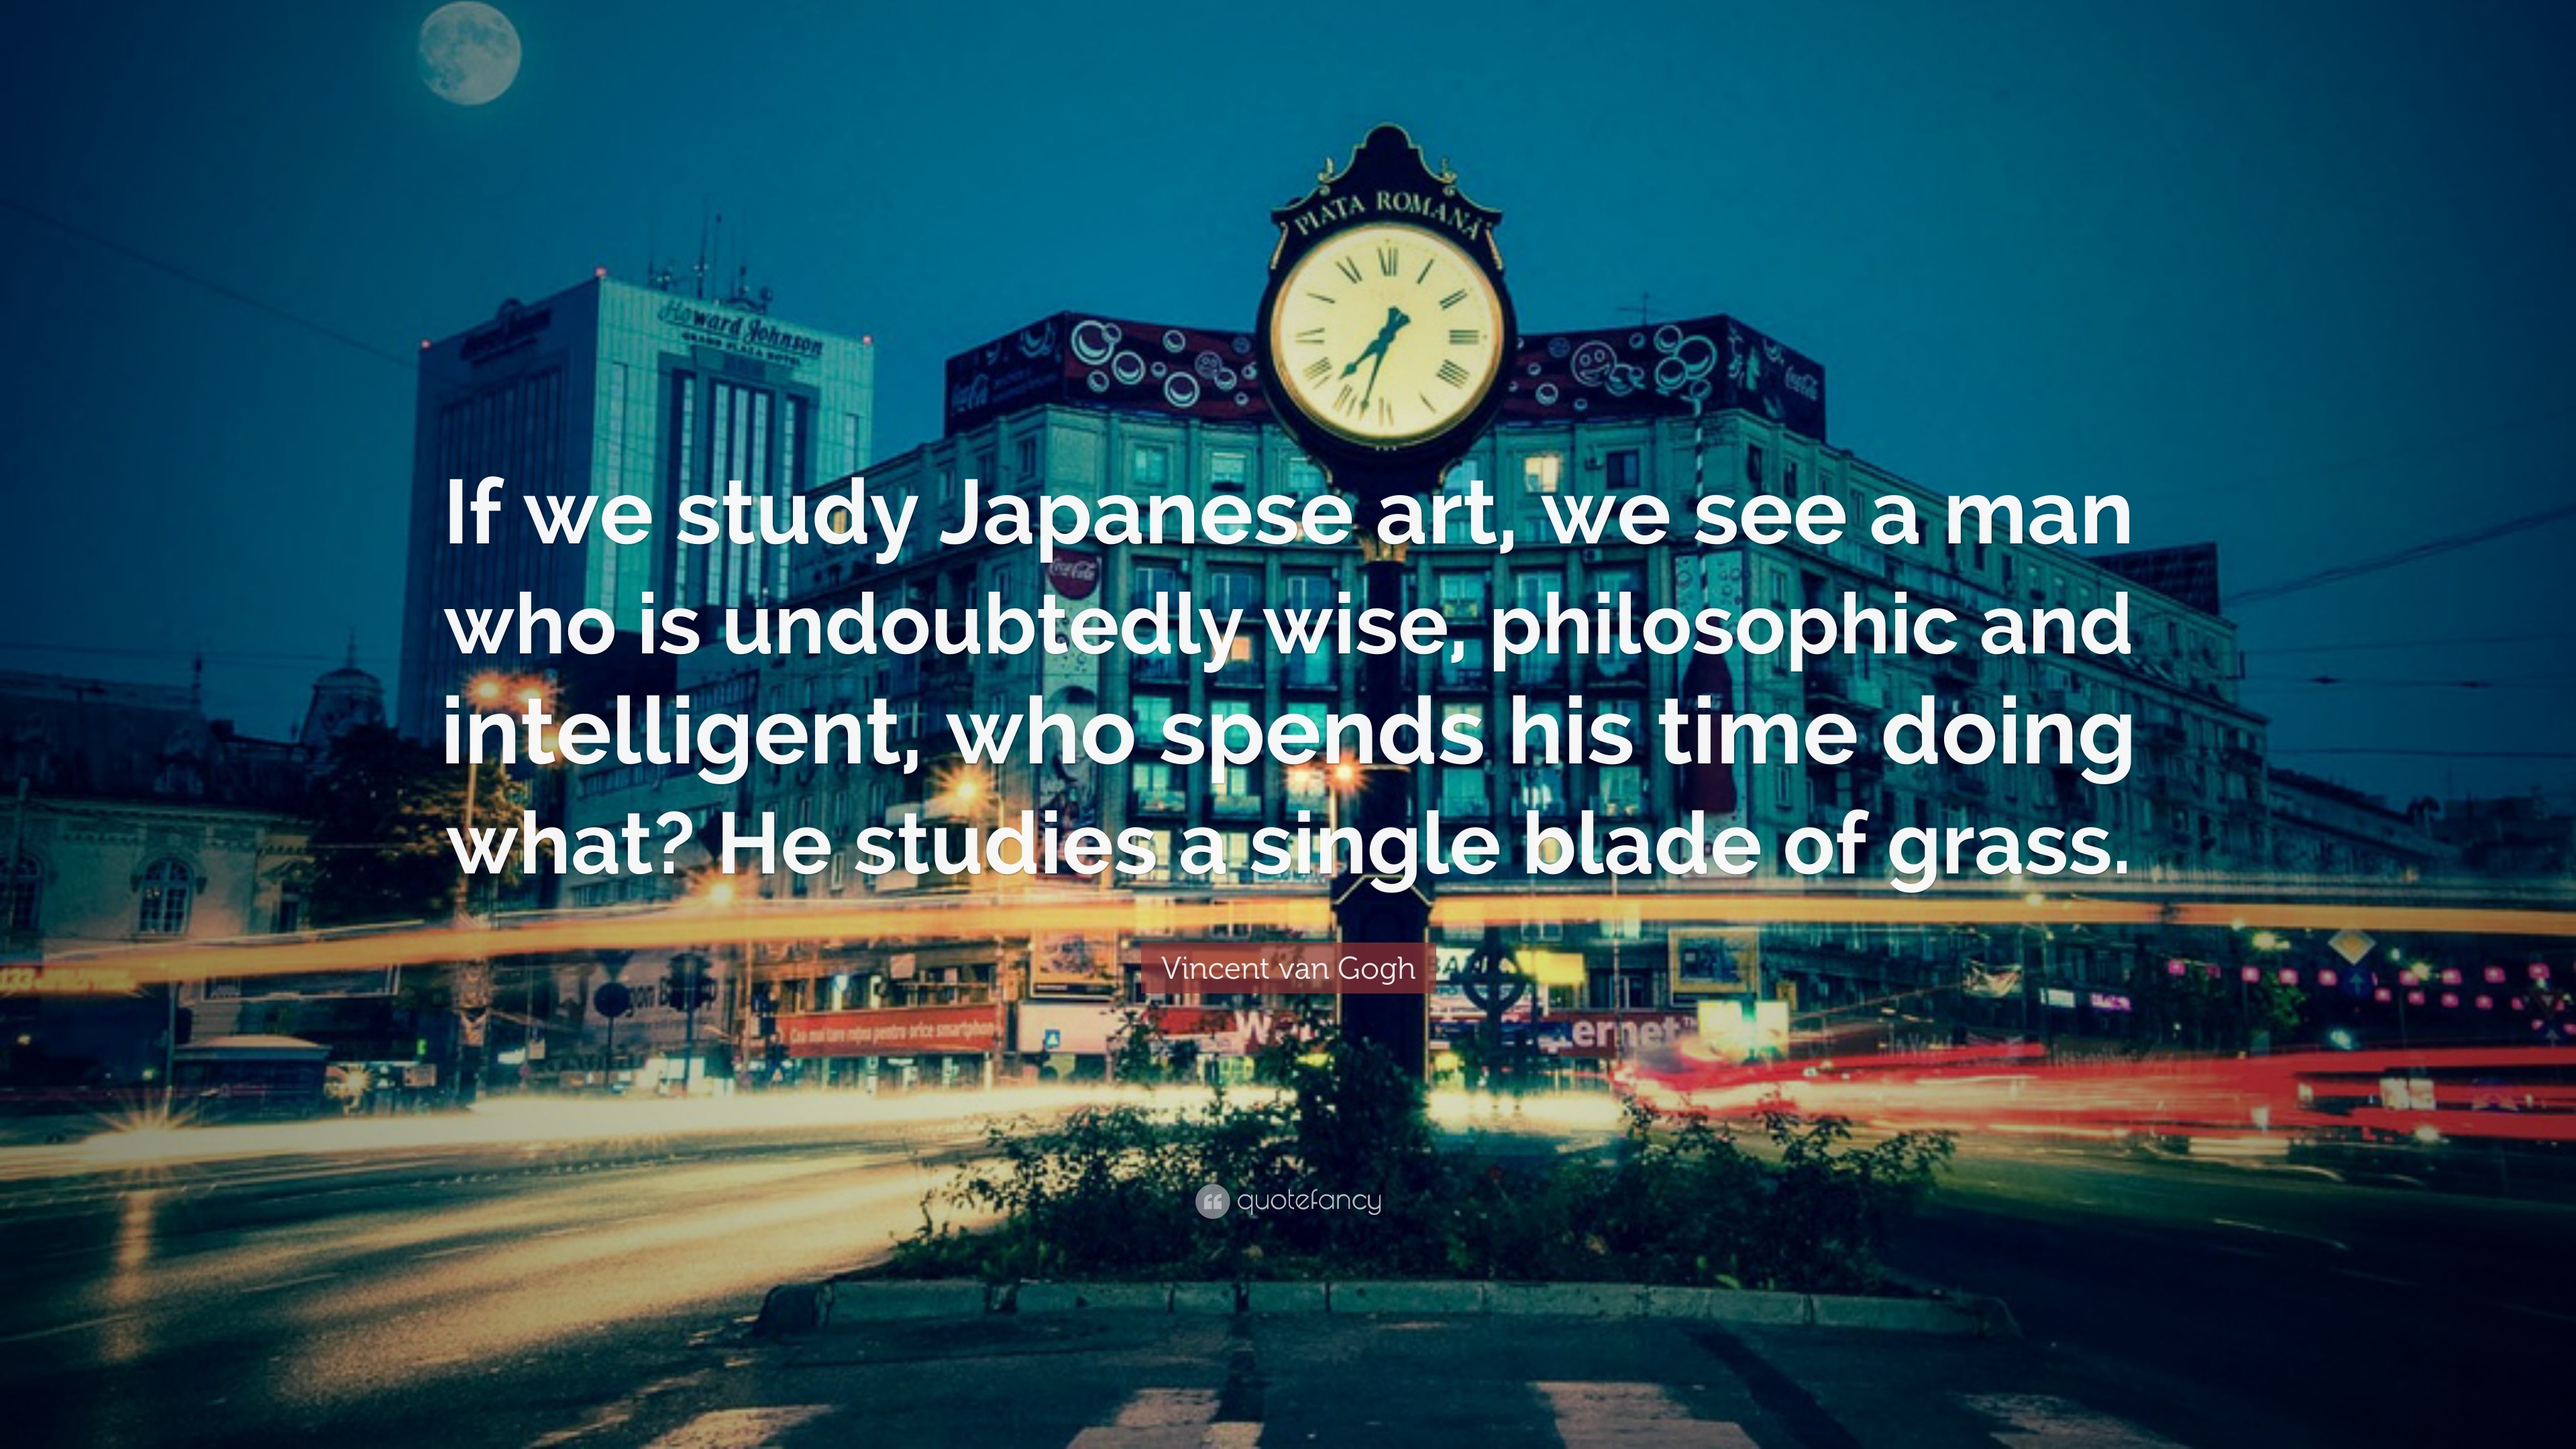 3840x2160 Vincent van Gogh Quote: “If we study Japanese art, we see a man